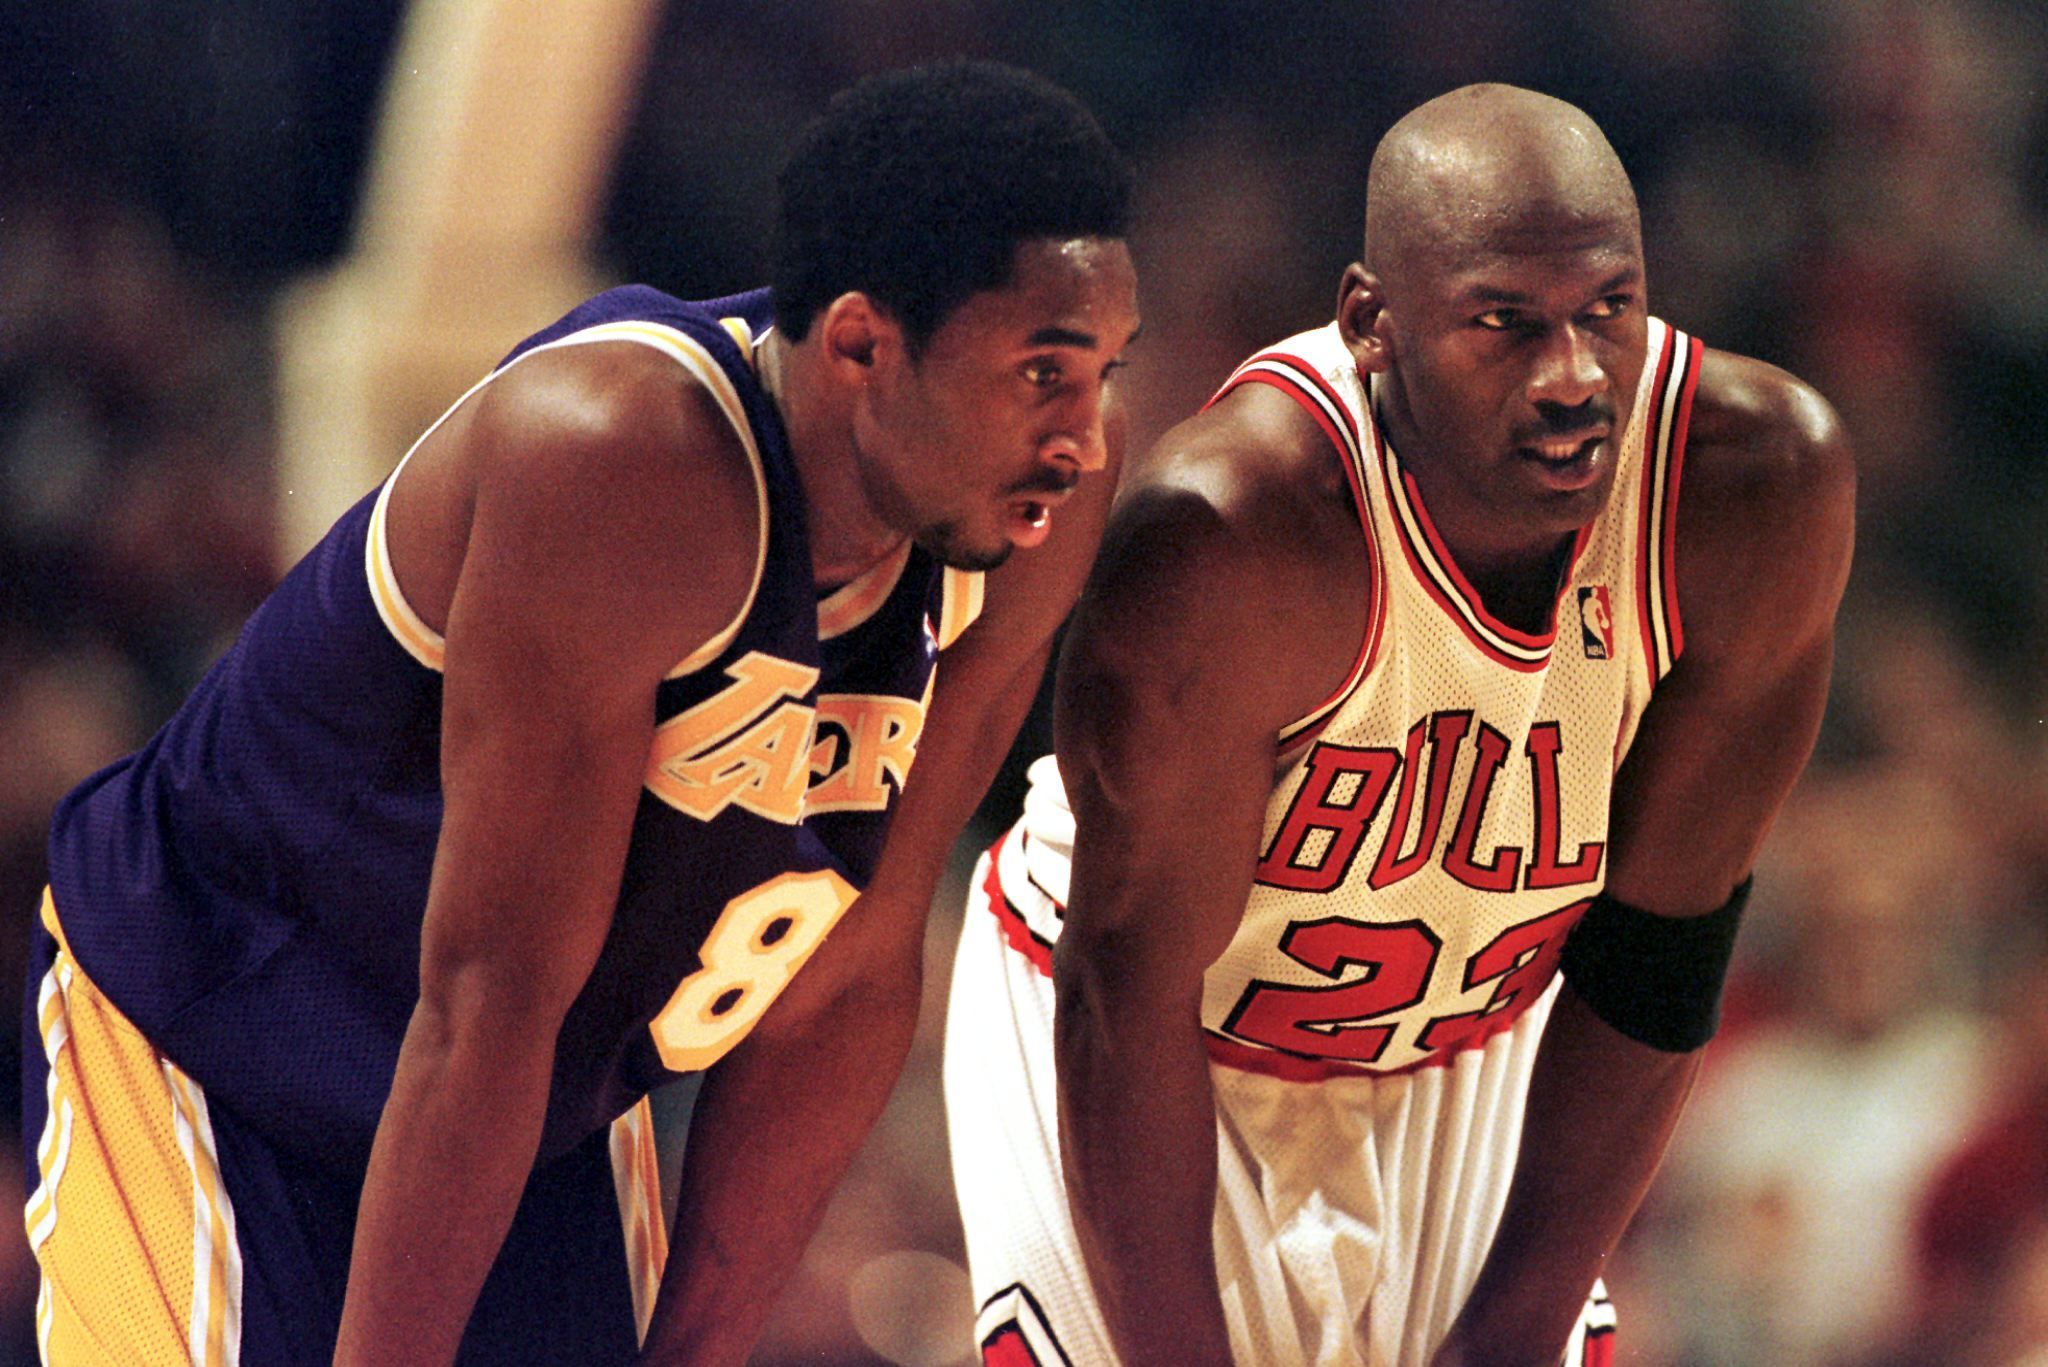 77 greatest players ever in NBA history: The HoopsHype list